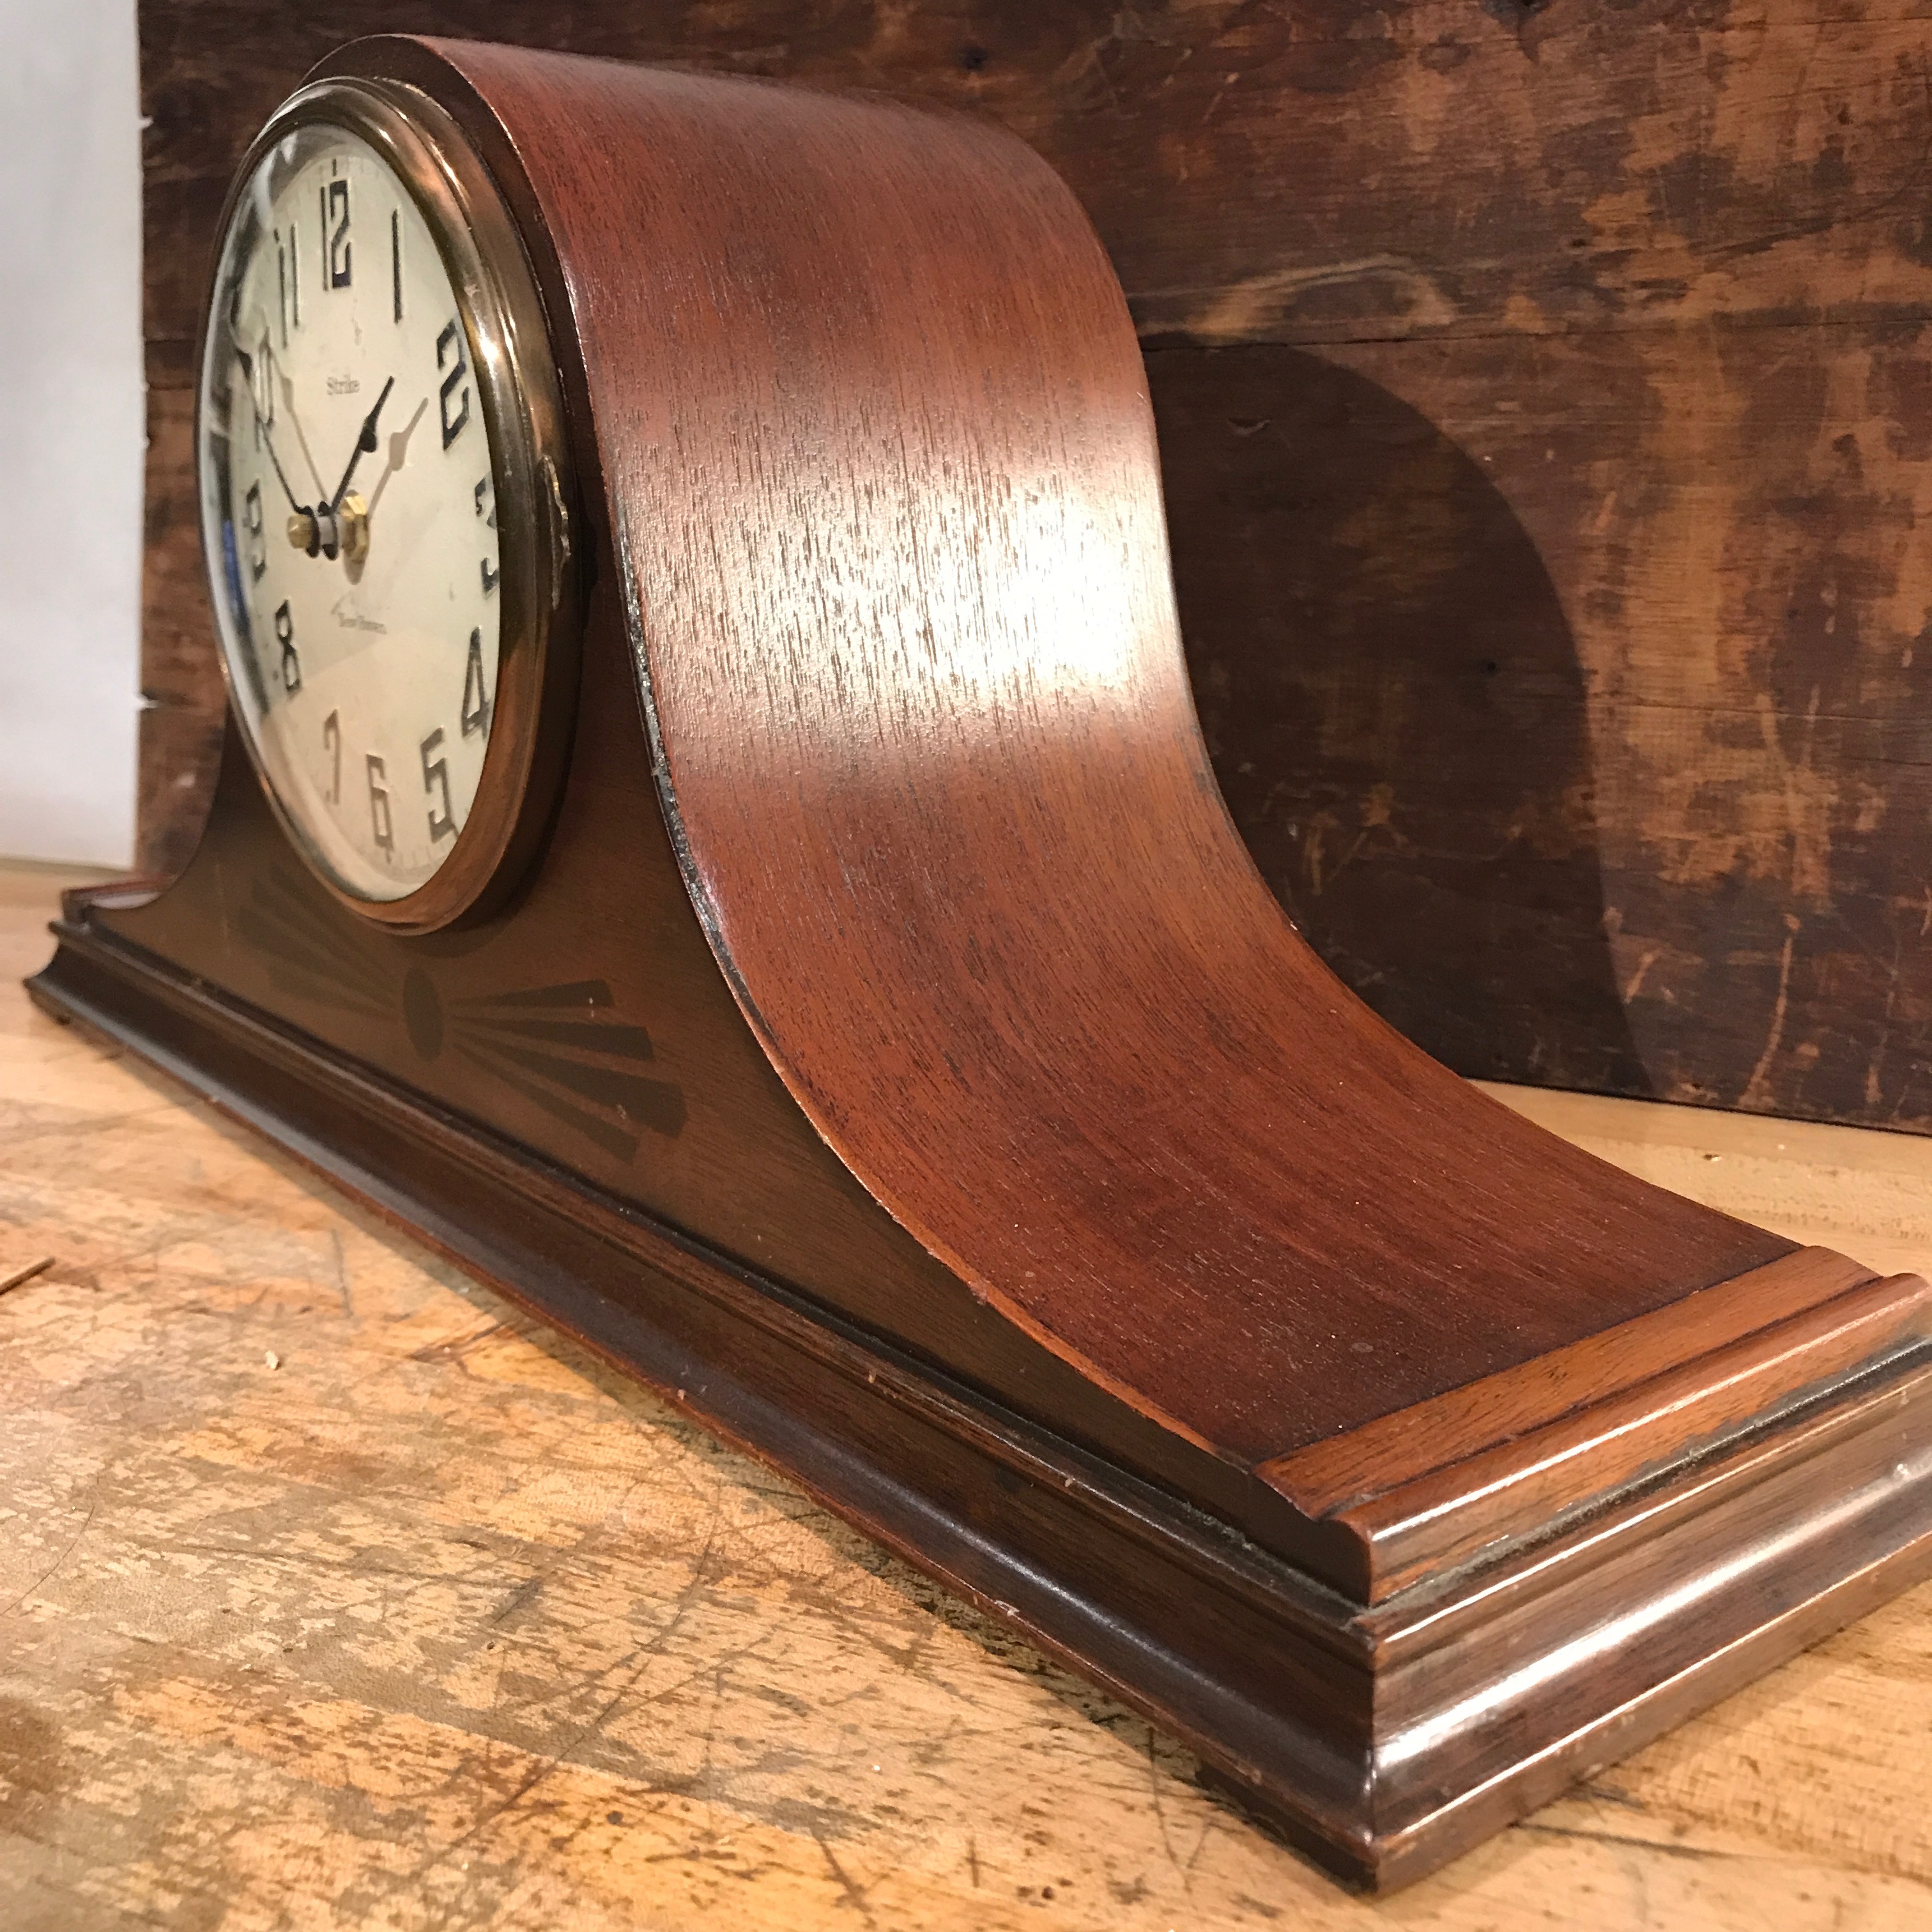 New Haven Humpback Mantle Clock - this style first appeared in the late  1800s